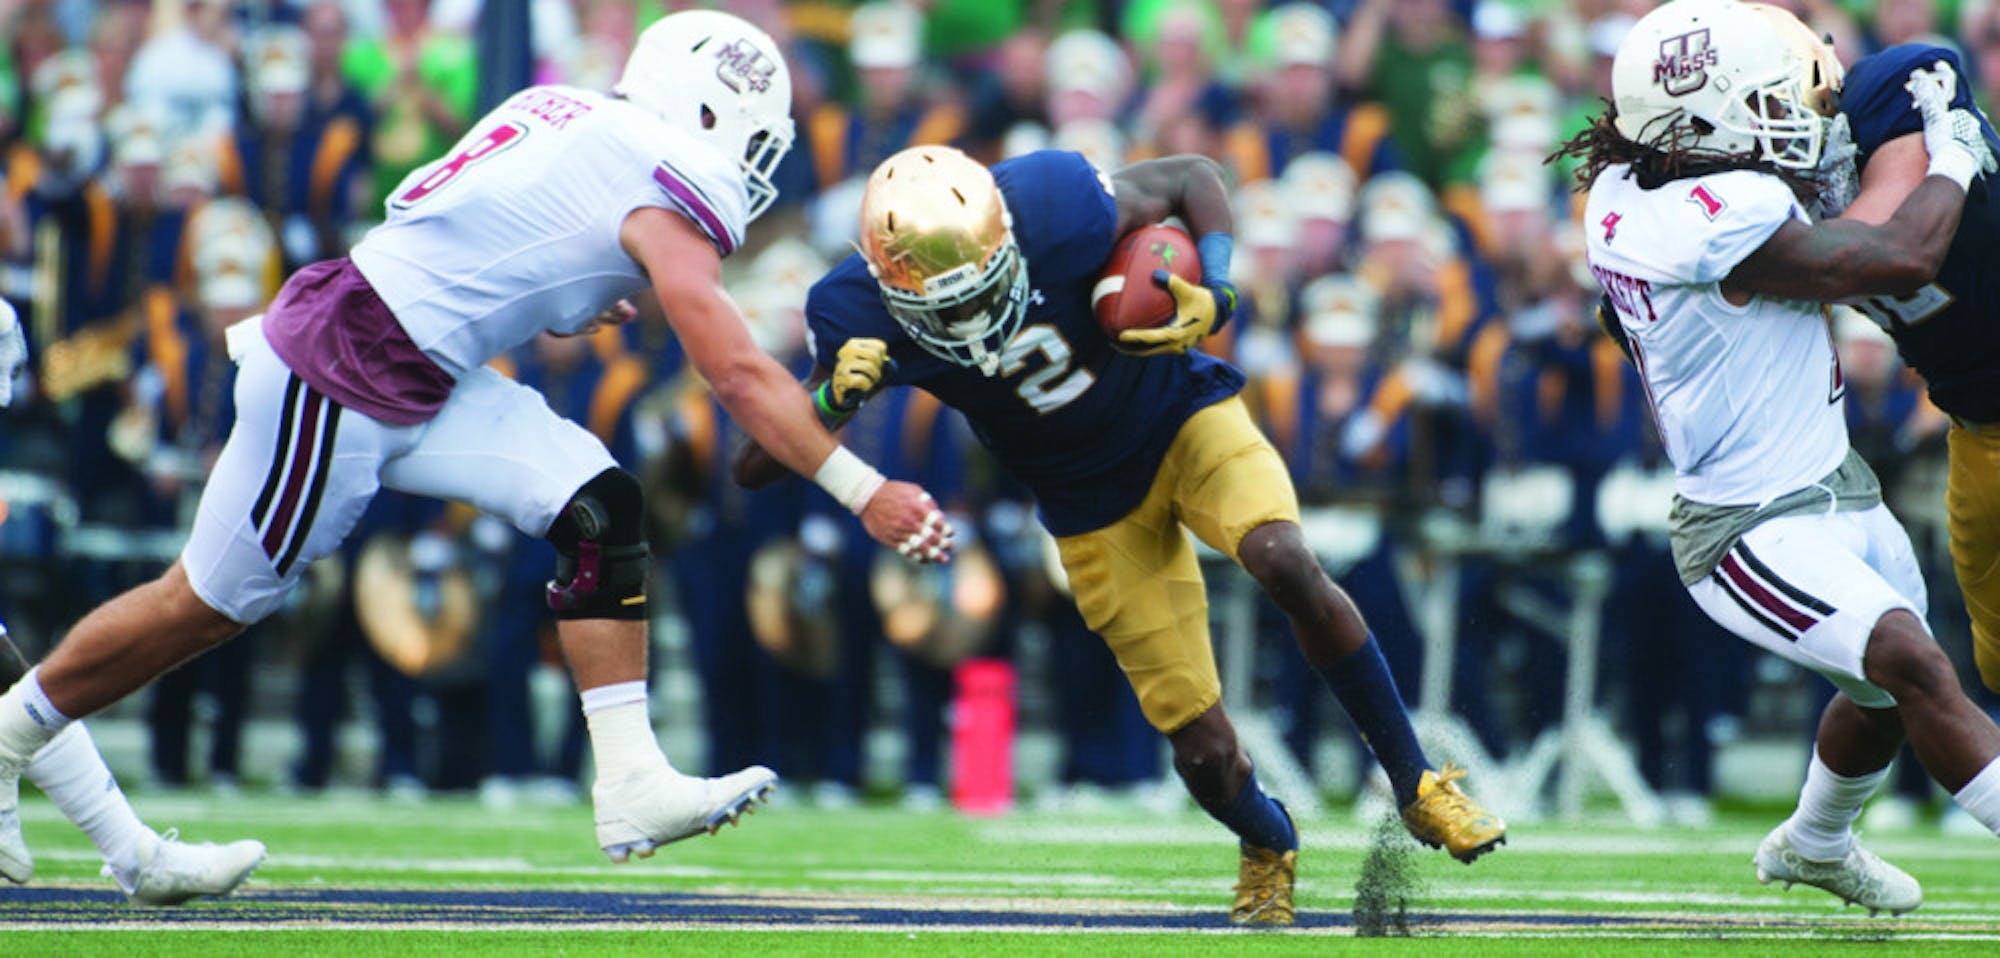 Senior receiver Chris Brown tries to power past Massachusetts redshirt sophomore linebacker Shane Huber during Notre Dame’s 62-27 victory over the Minutemen last Saturday at Notre Dame Stadium.